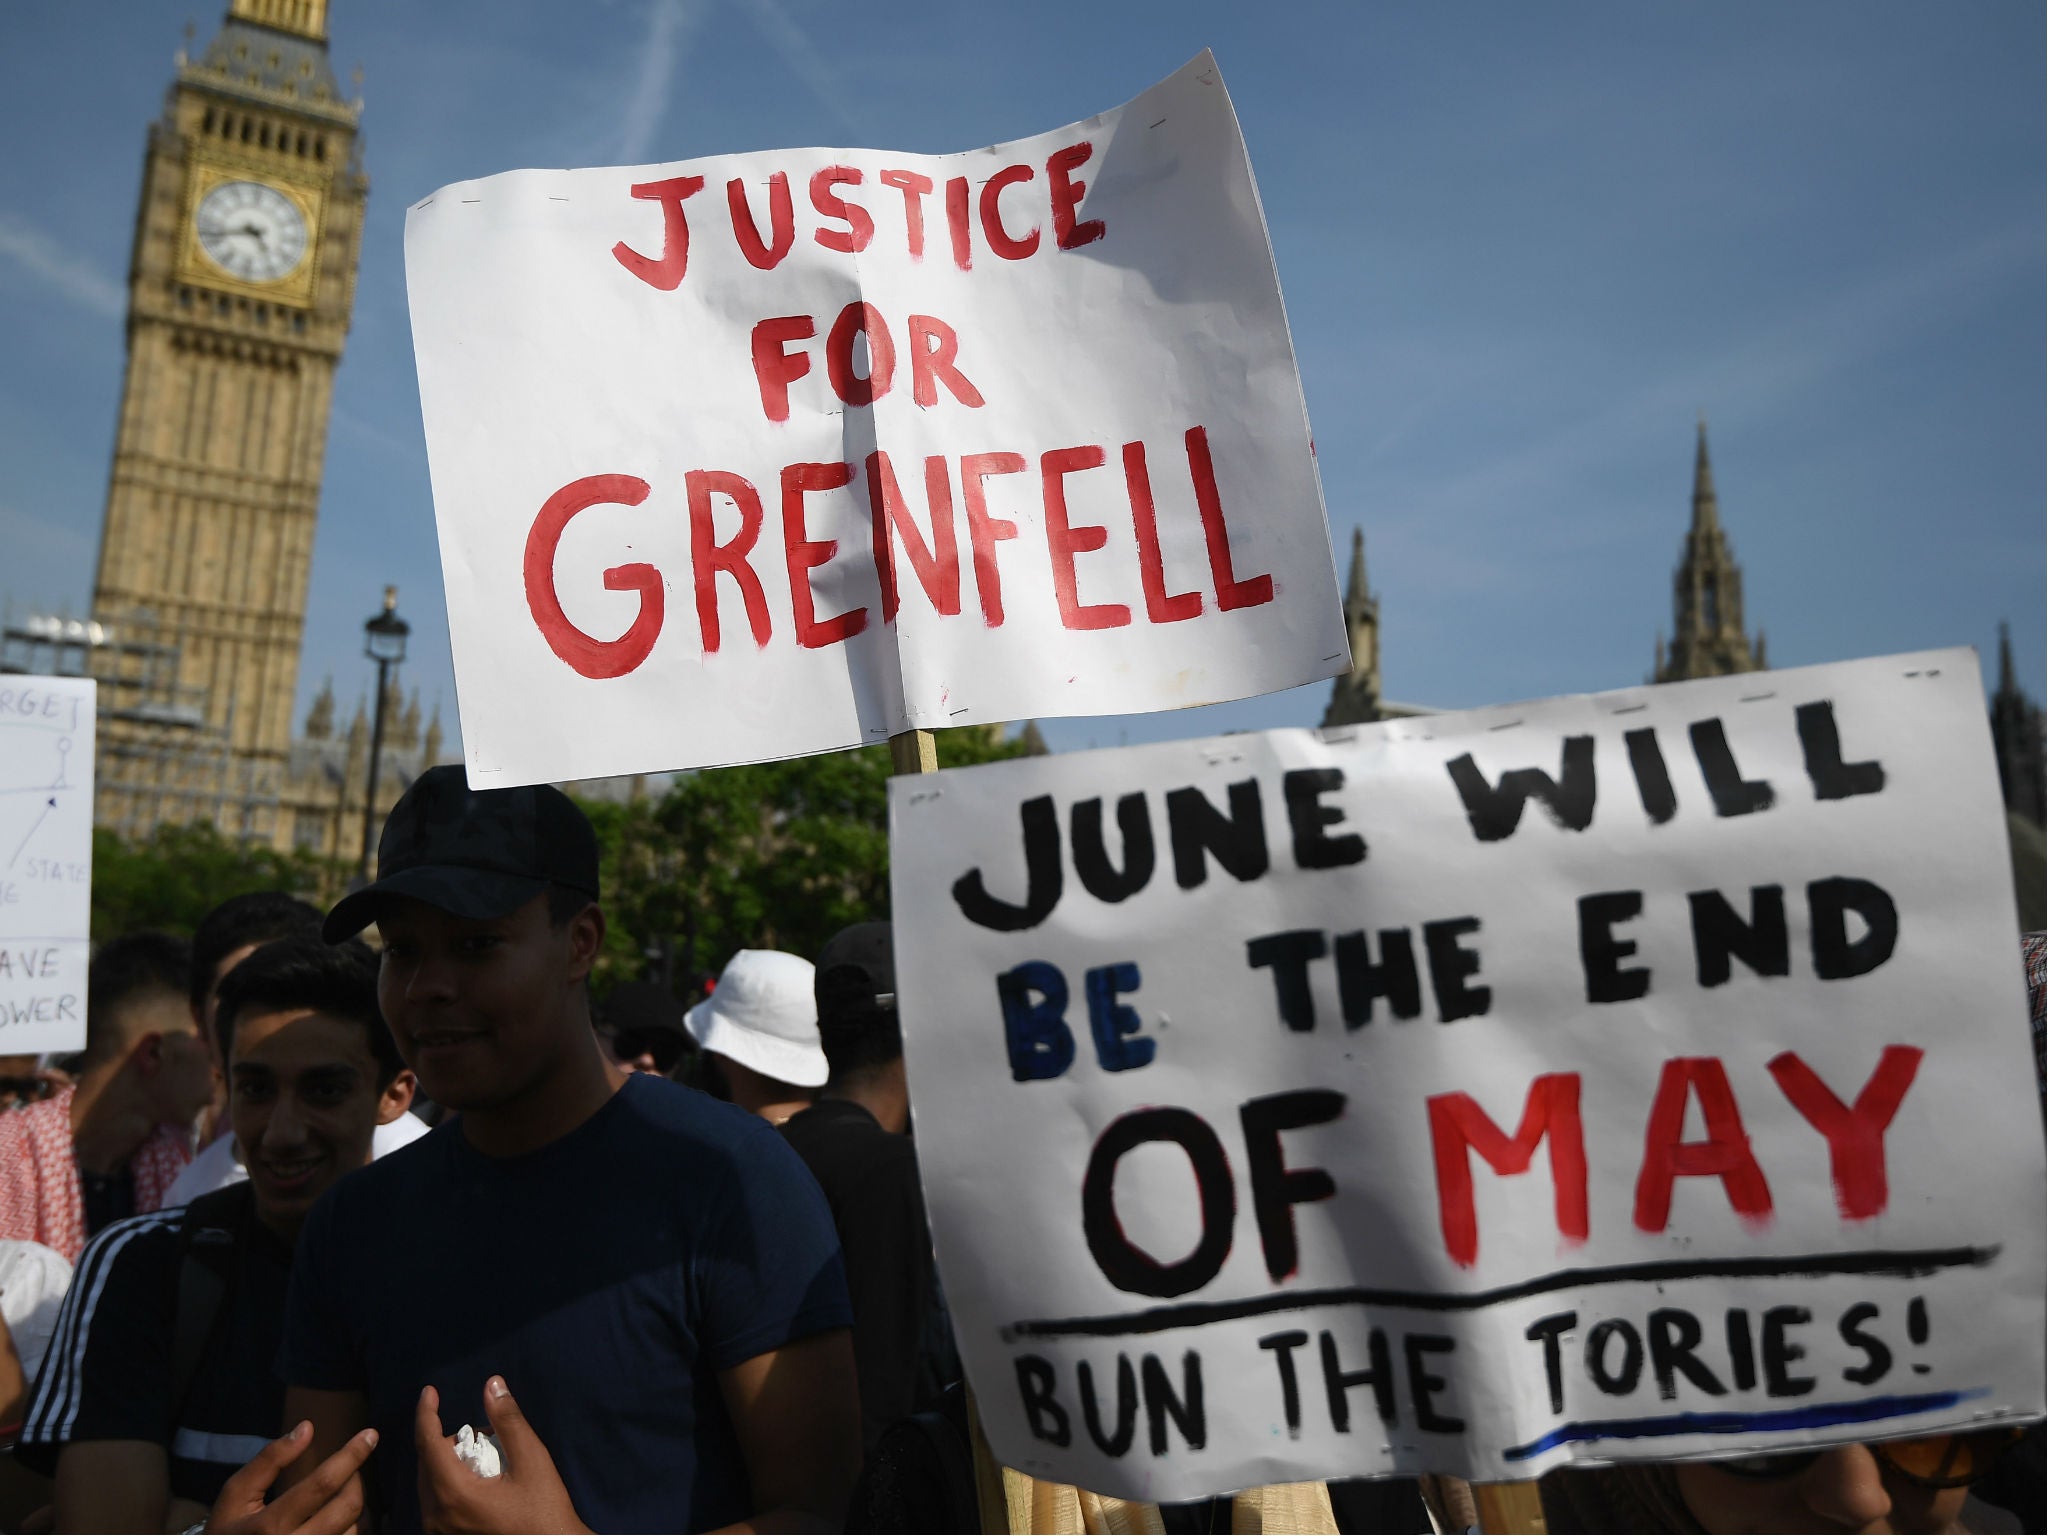 Protesters hold signs calling for a change of government and justice for the victims of the Grenfell Disaster in Parliament Square during an anti-government protest on June 21, 2017 in London, England.